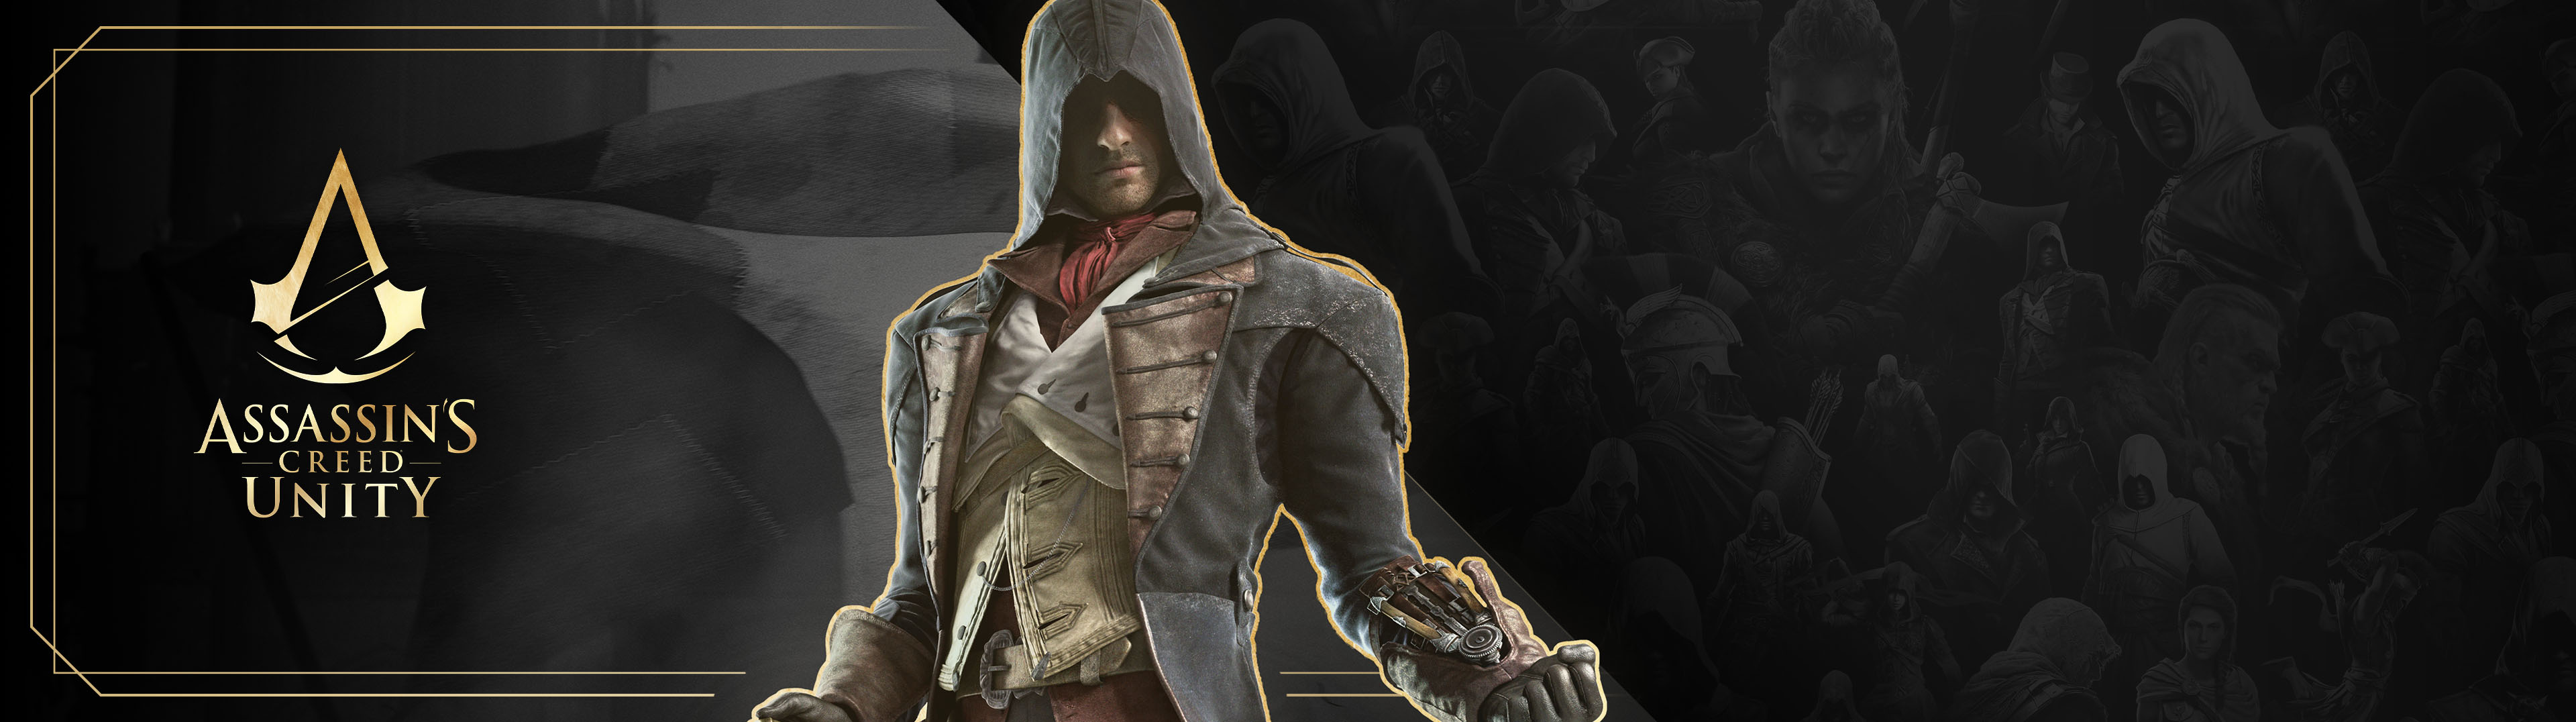 Assassin's Creed Franchise Games | Official Ubisoft Store - SG